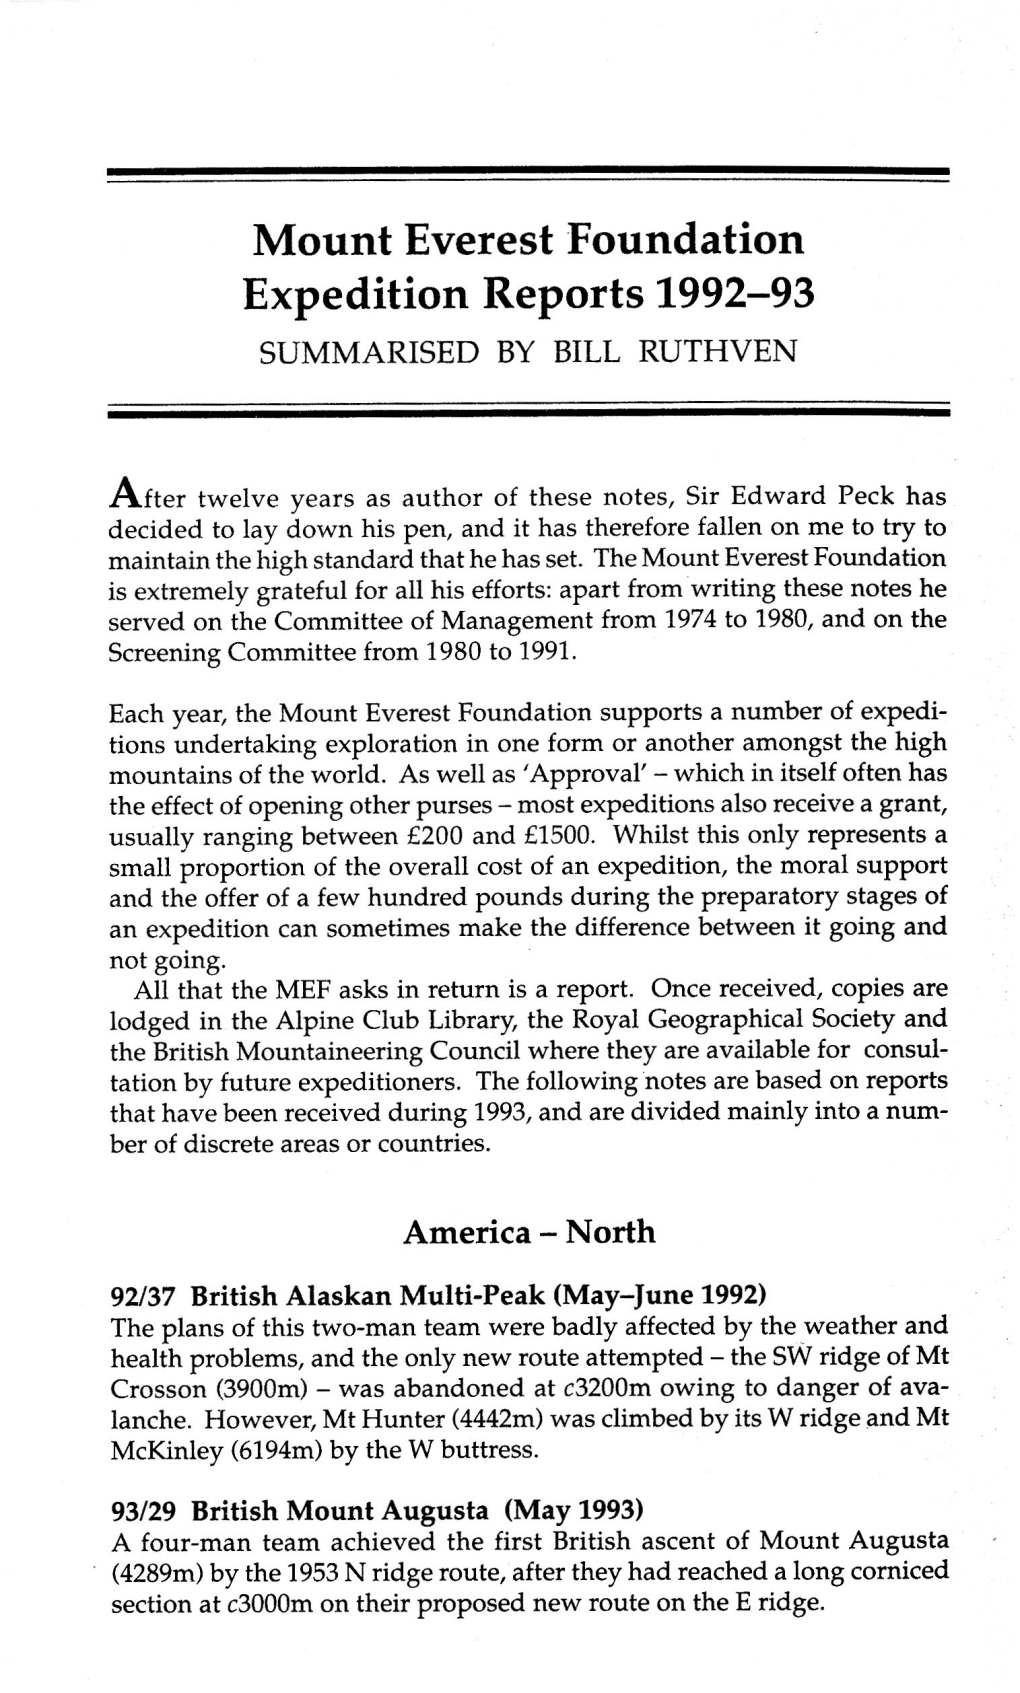 Mount Everest Foundation Expedition Reports 1992-93 SUMMARISED by BILL RUTHVEN